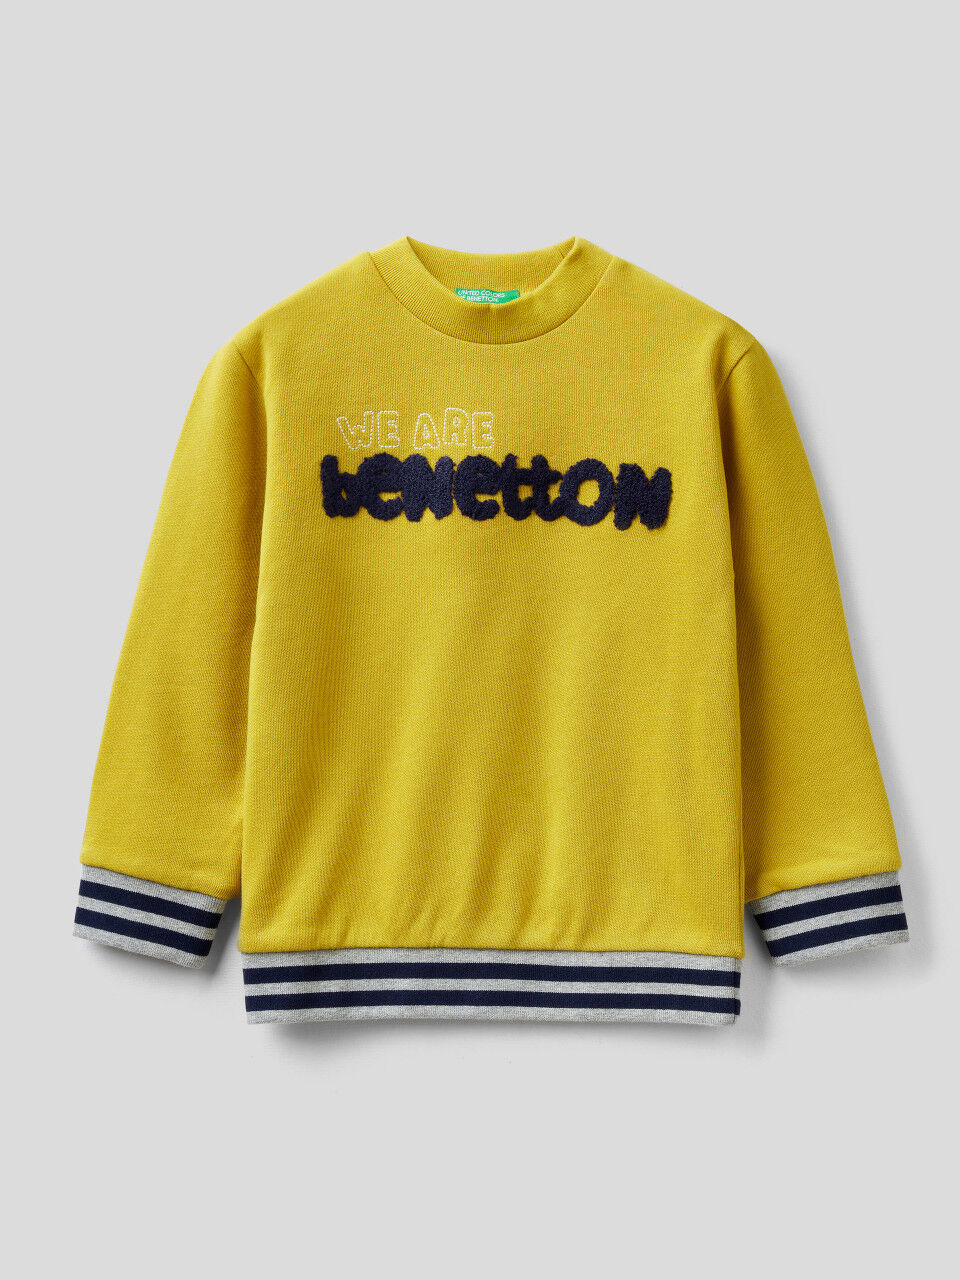 Sweatshirt in pure cotton with embroidered logo